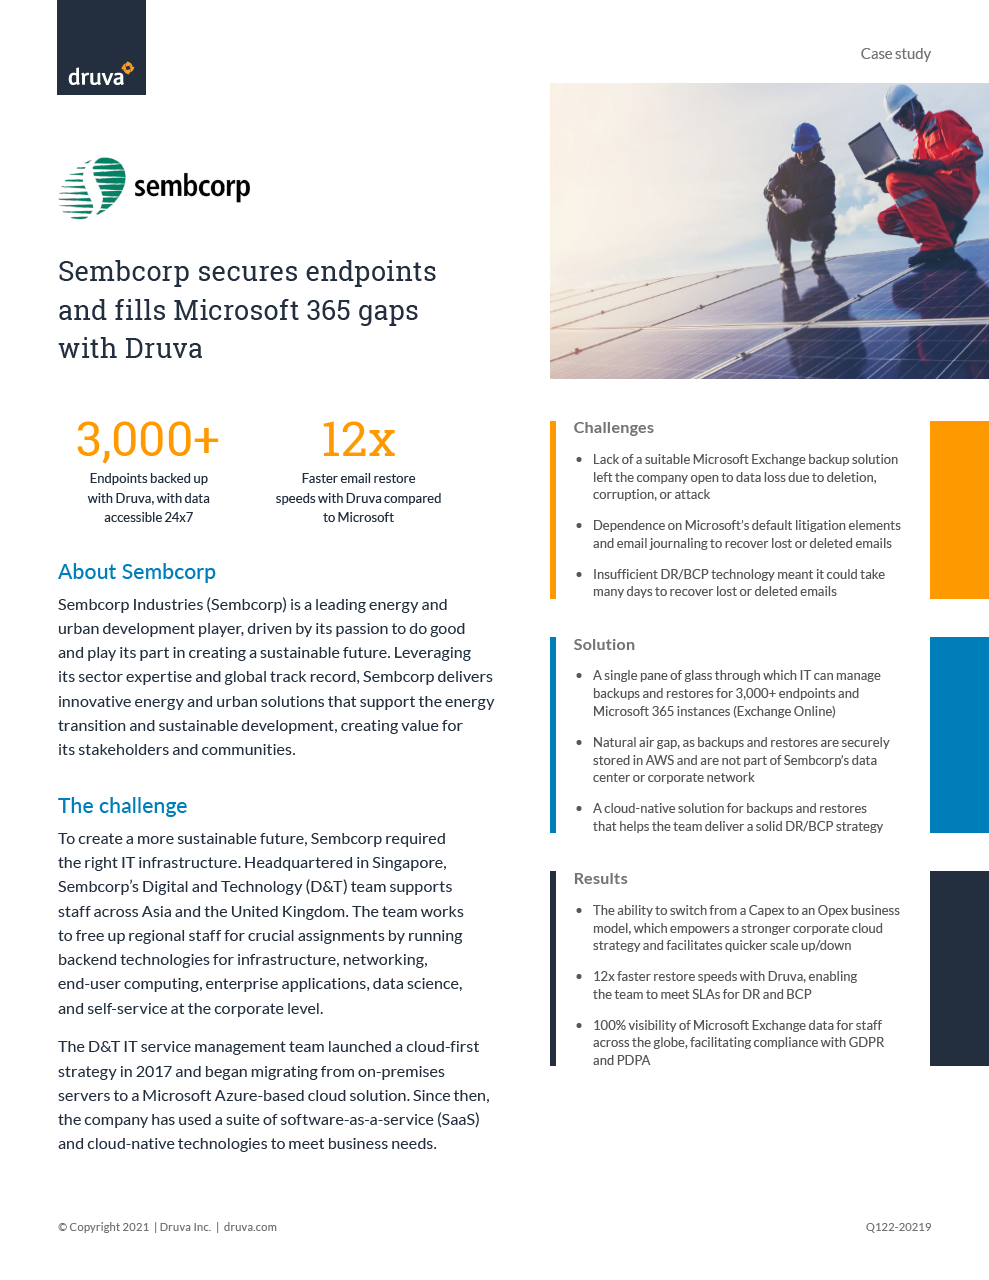 Sembcorp secures endpoints and fills Microsoft 365 gaps with Druva